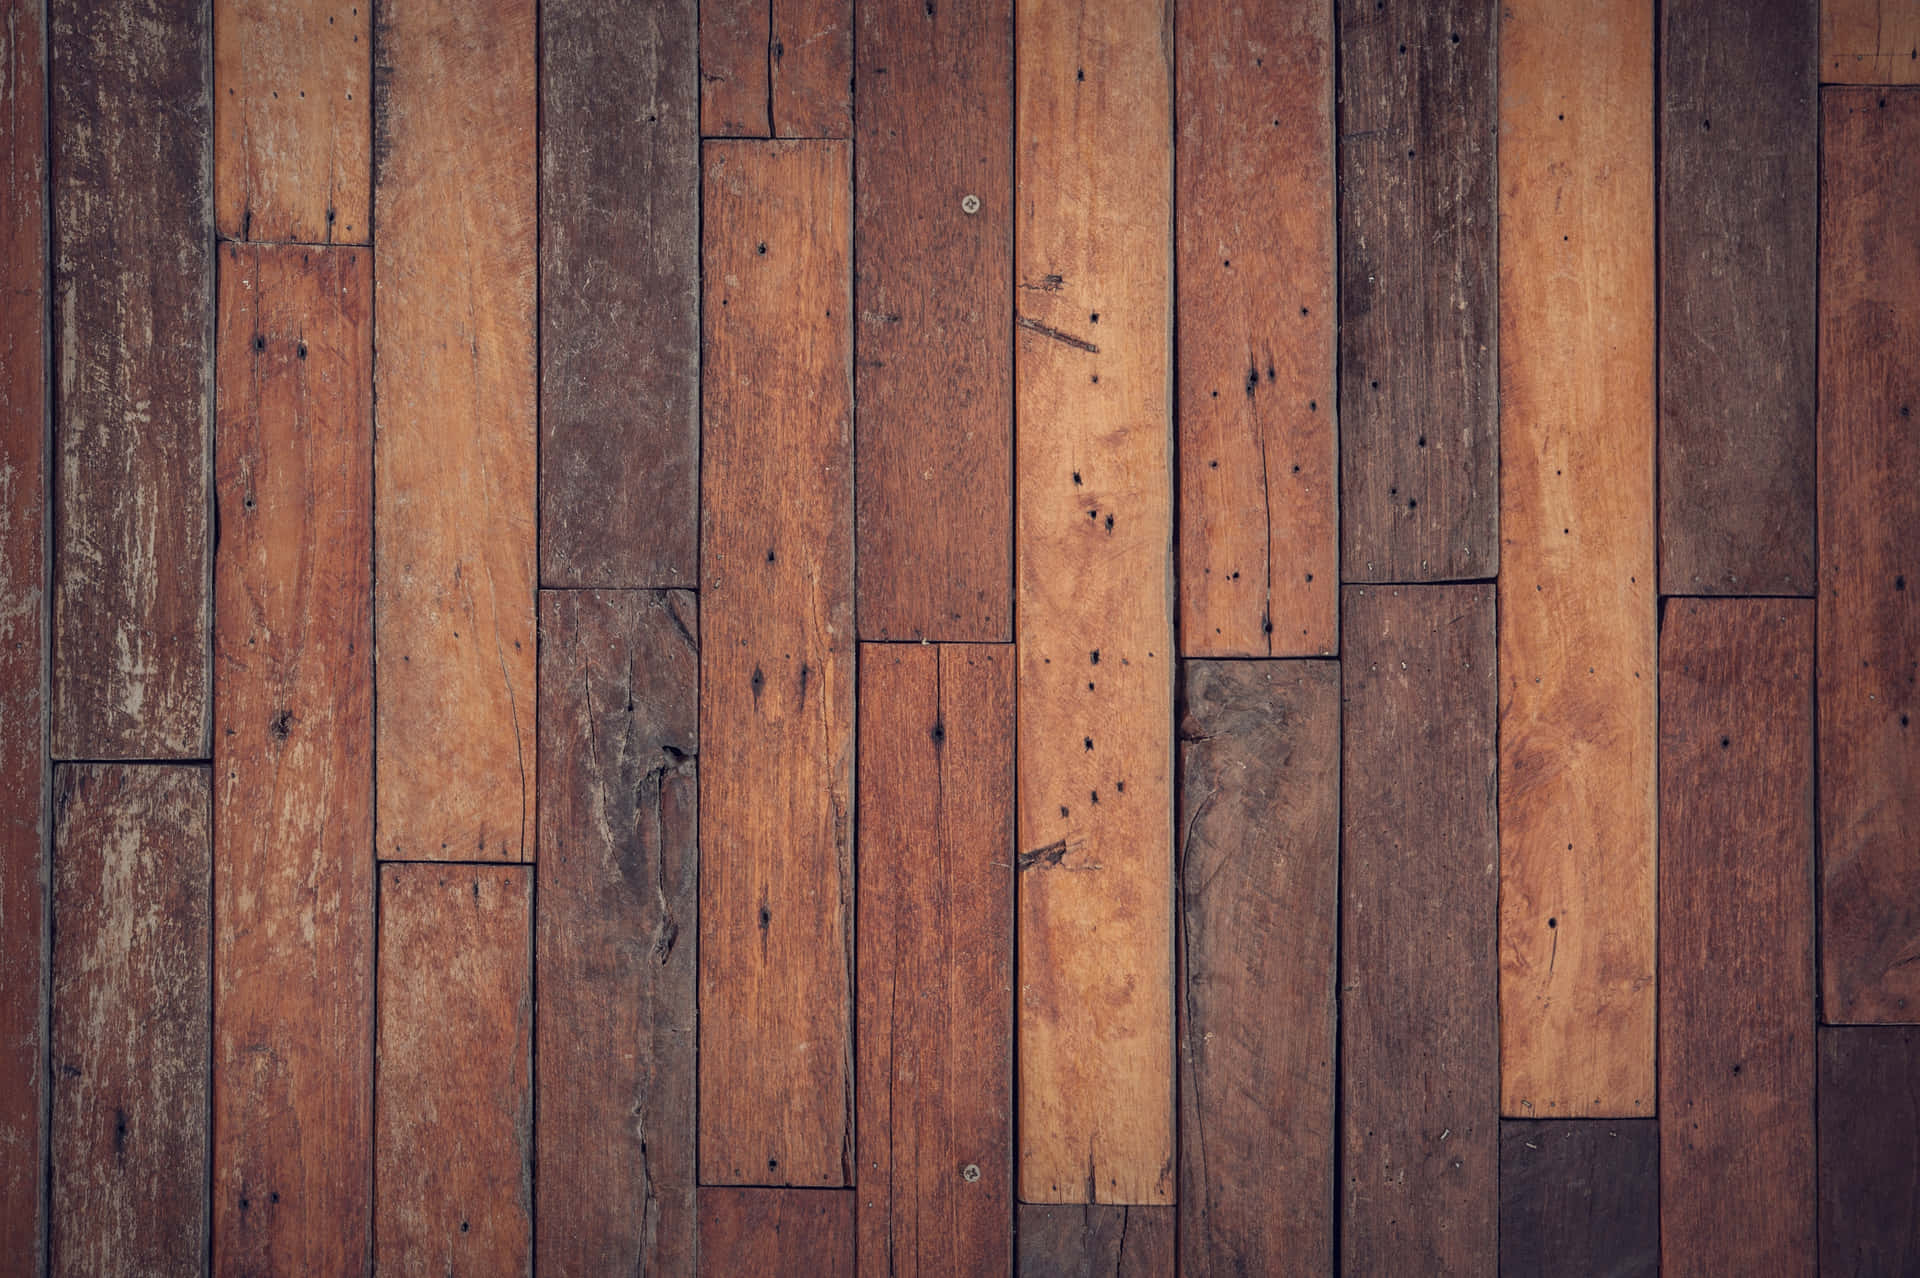 A Wooden Floor With Brown And Brown Stripes